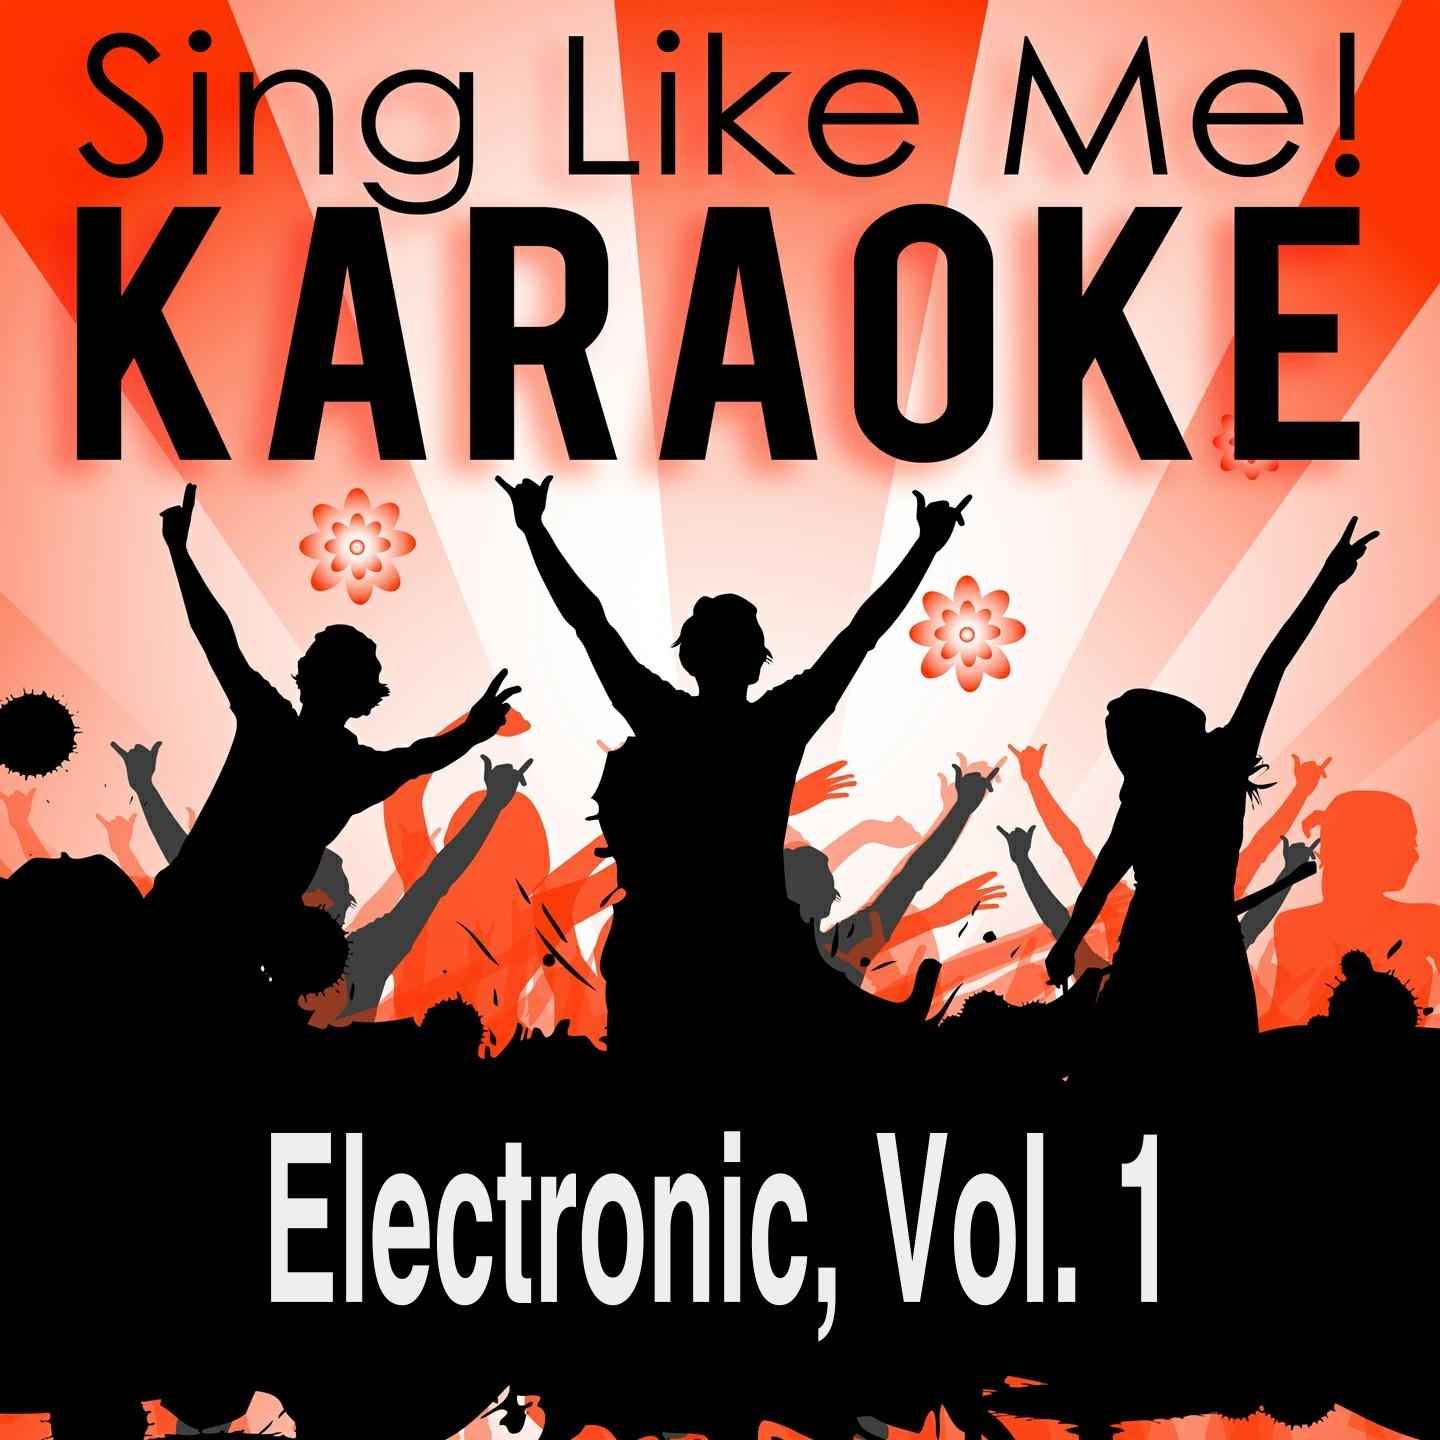 Scandalous (Karaoke Version With Guide Melody) (Originally Performed By Mis-Teeq)